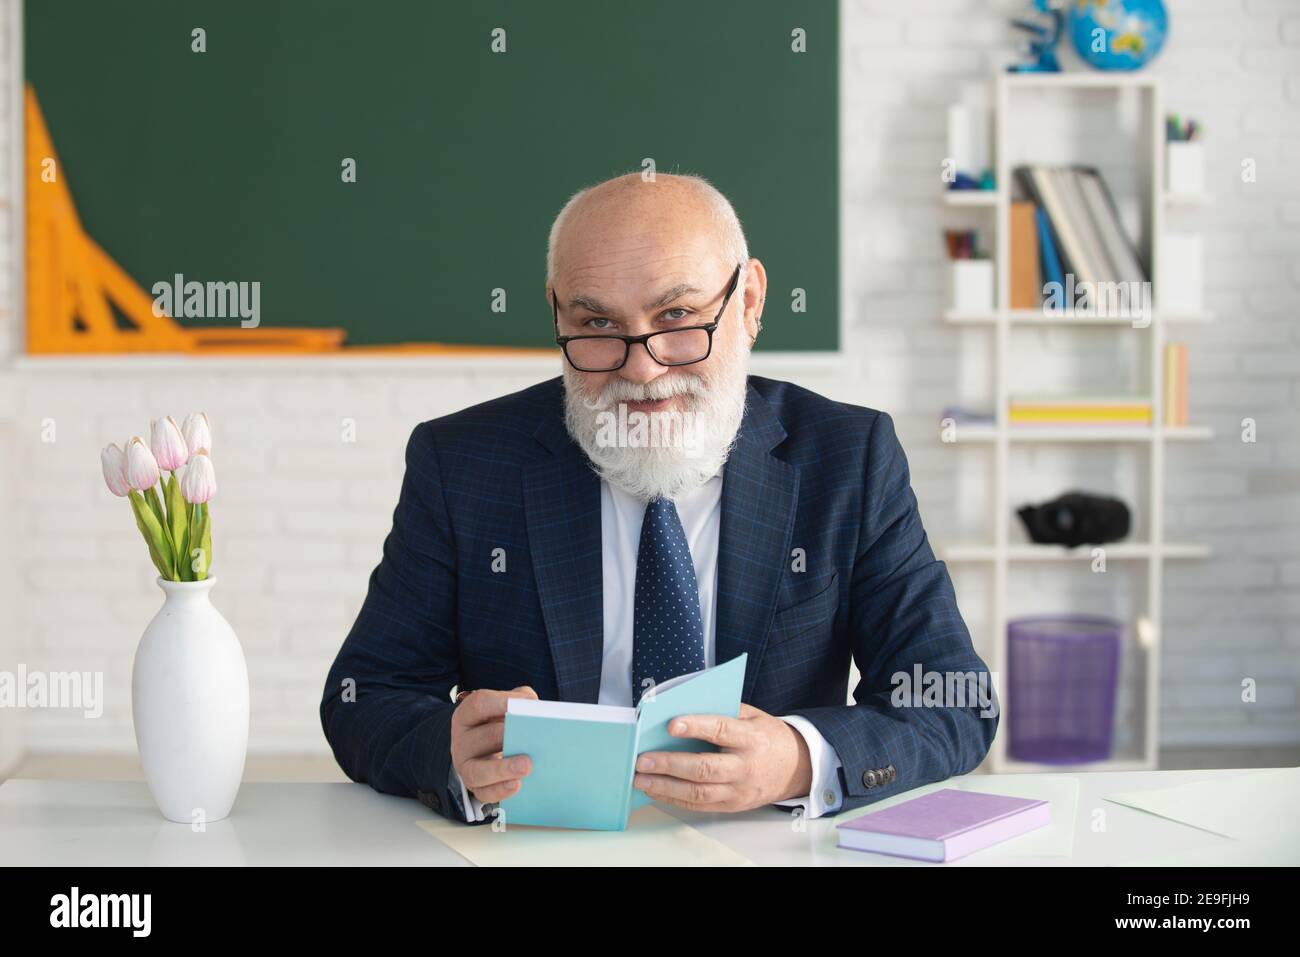 2. Blue Hair Professor Stock Photos, Pictures & Royalty-Free Images - wide 7